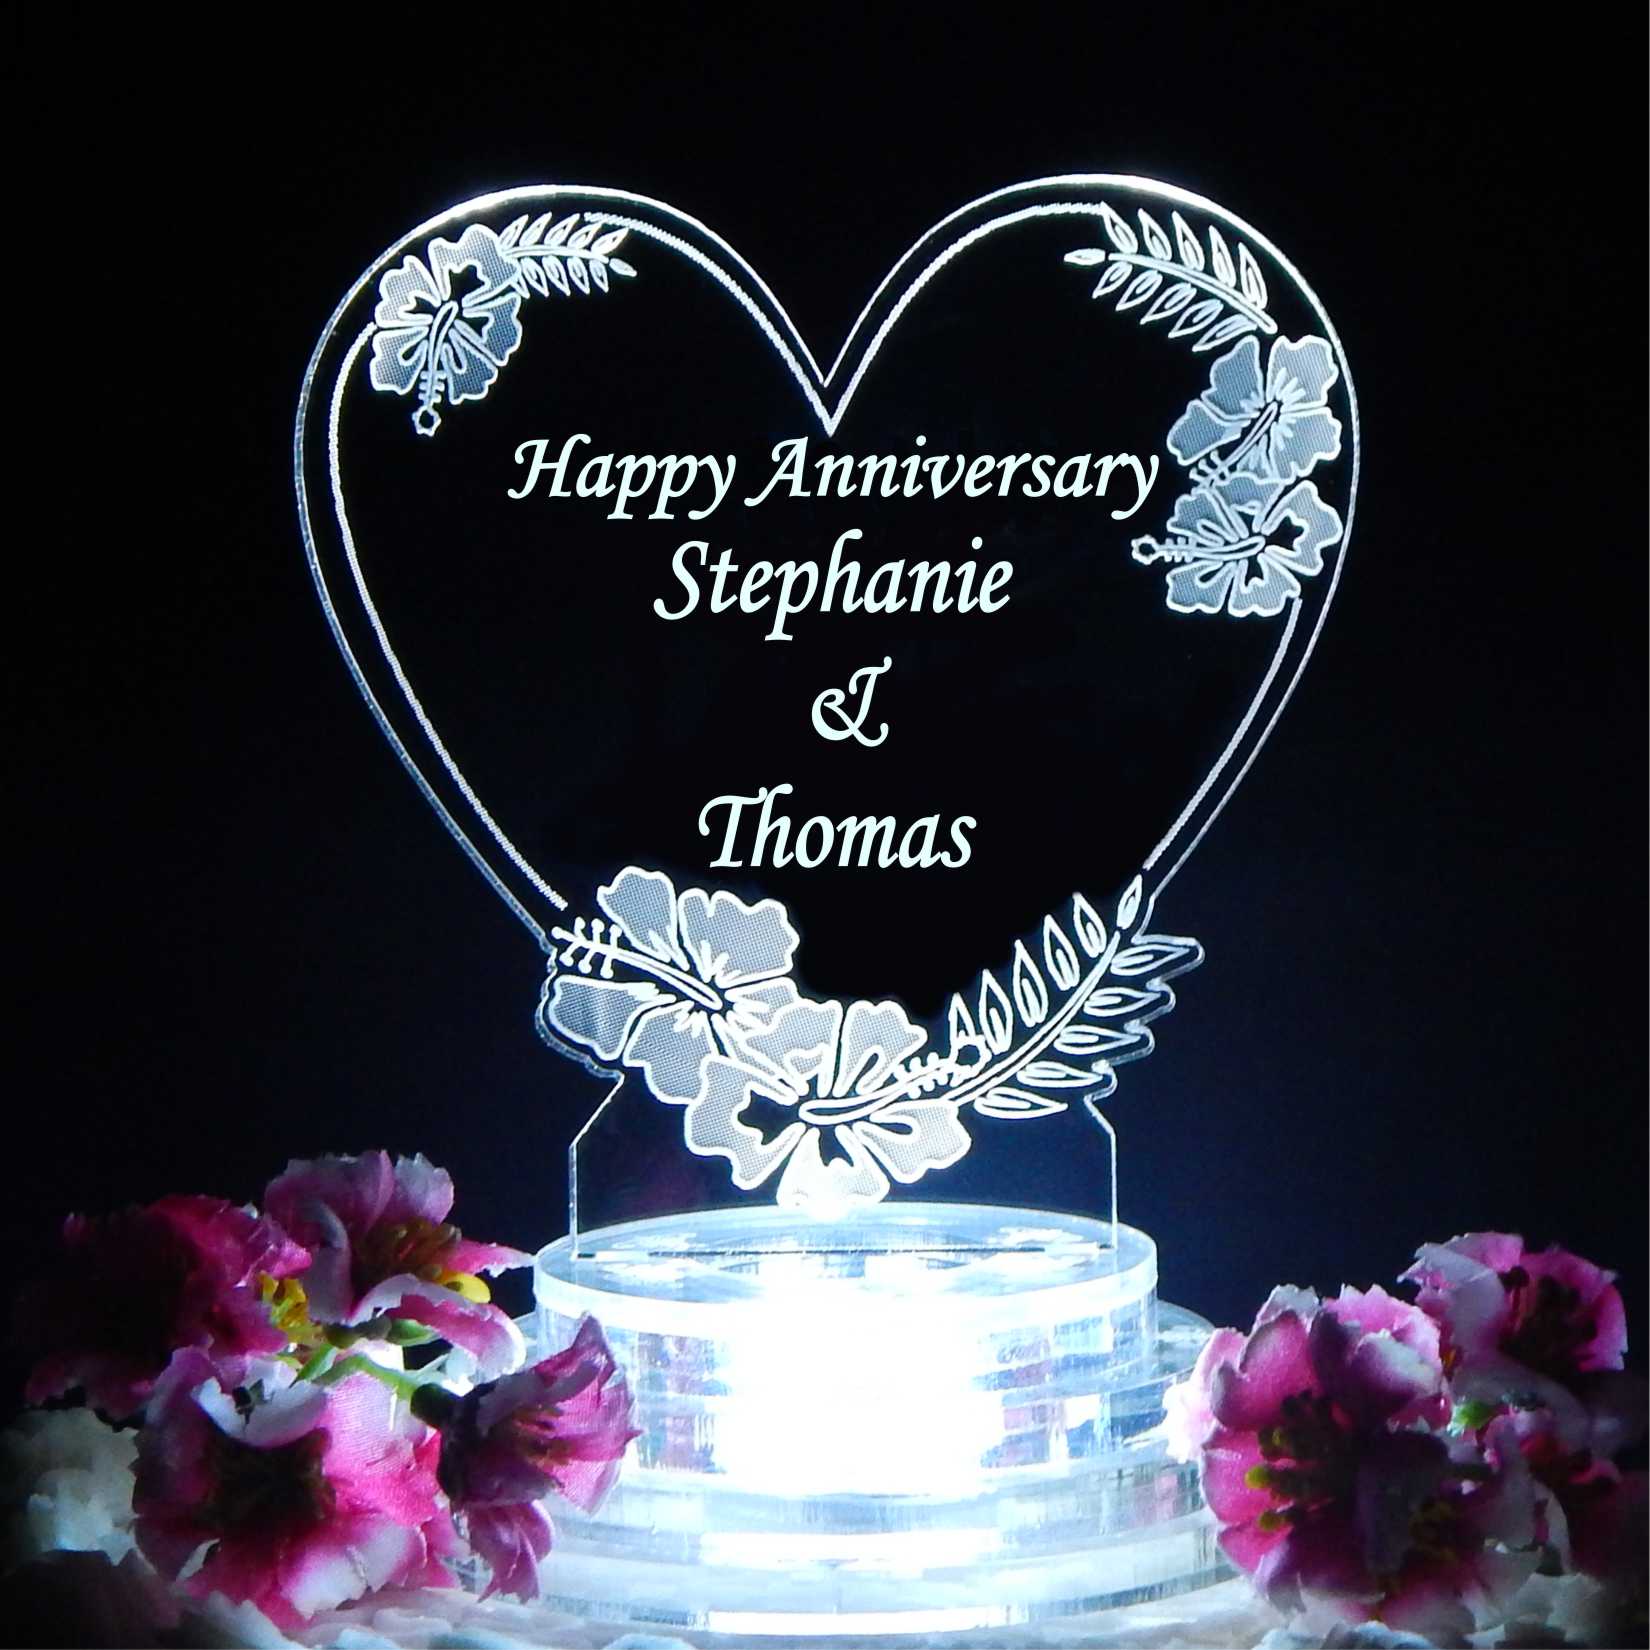 heart shaped cake topper with hibiscus flower design and Happy anniversary along with dates engraved